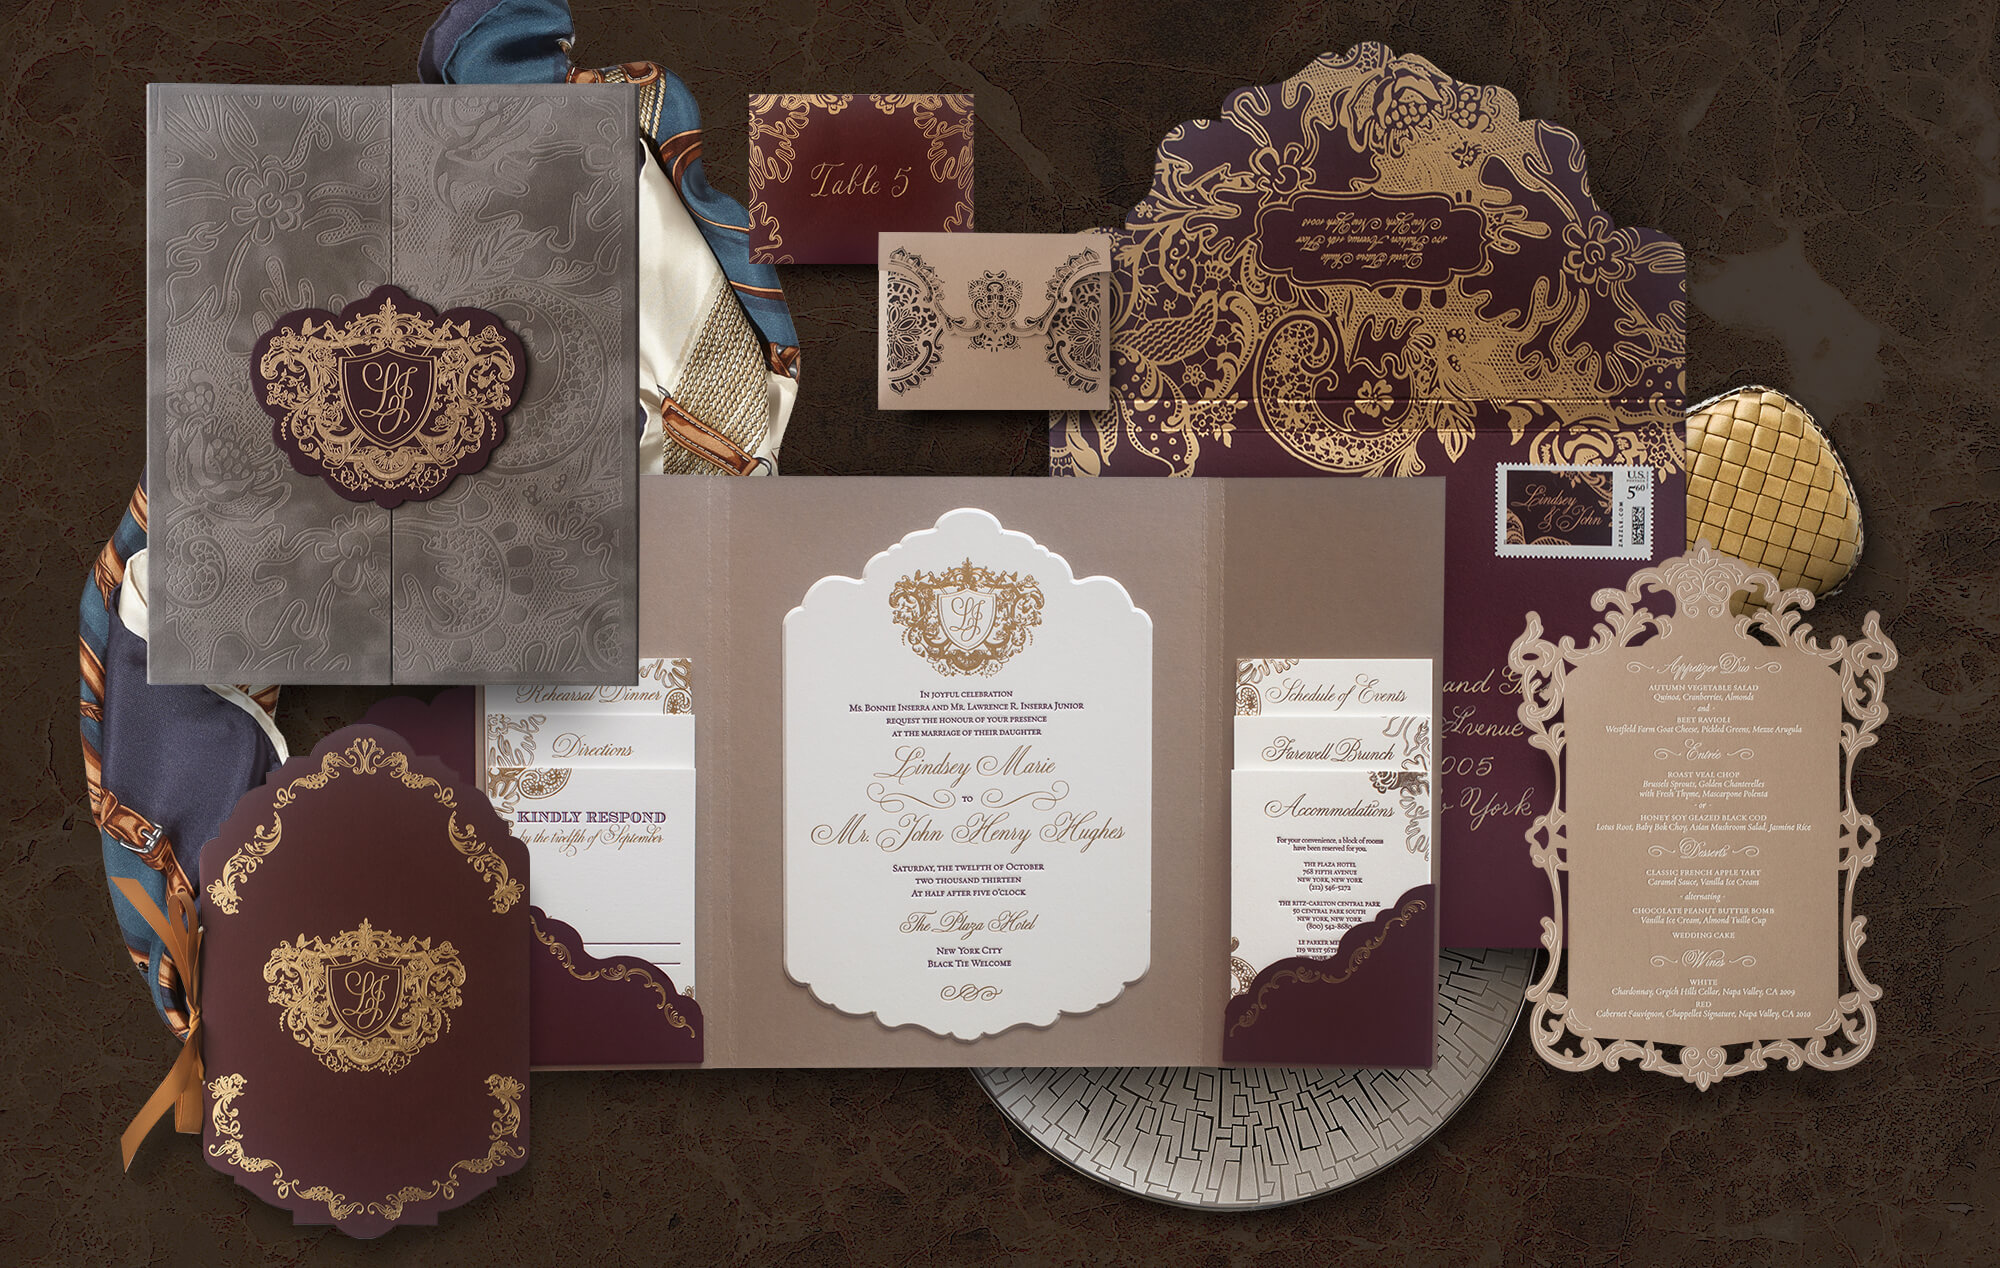 Ornate wedding invitation suite inspired by the Plaza Hotel